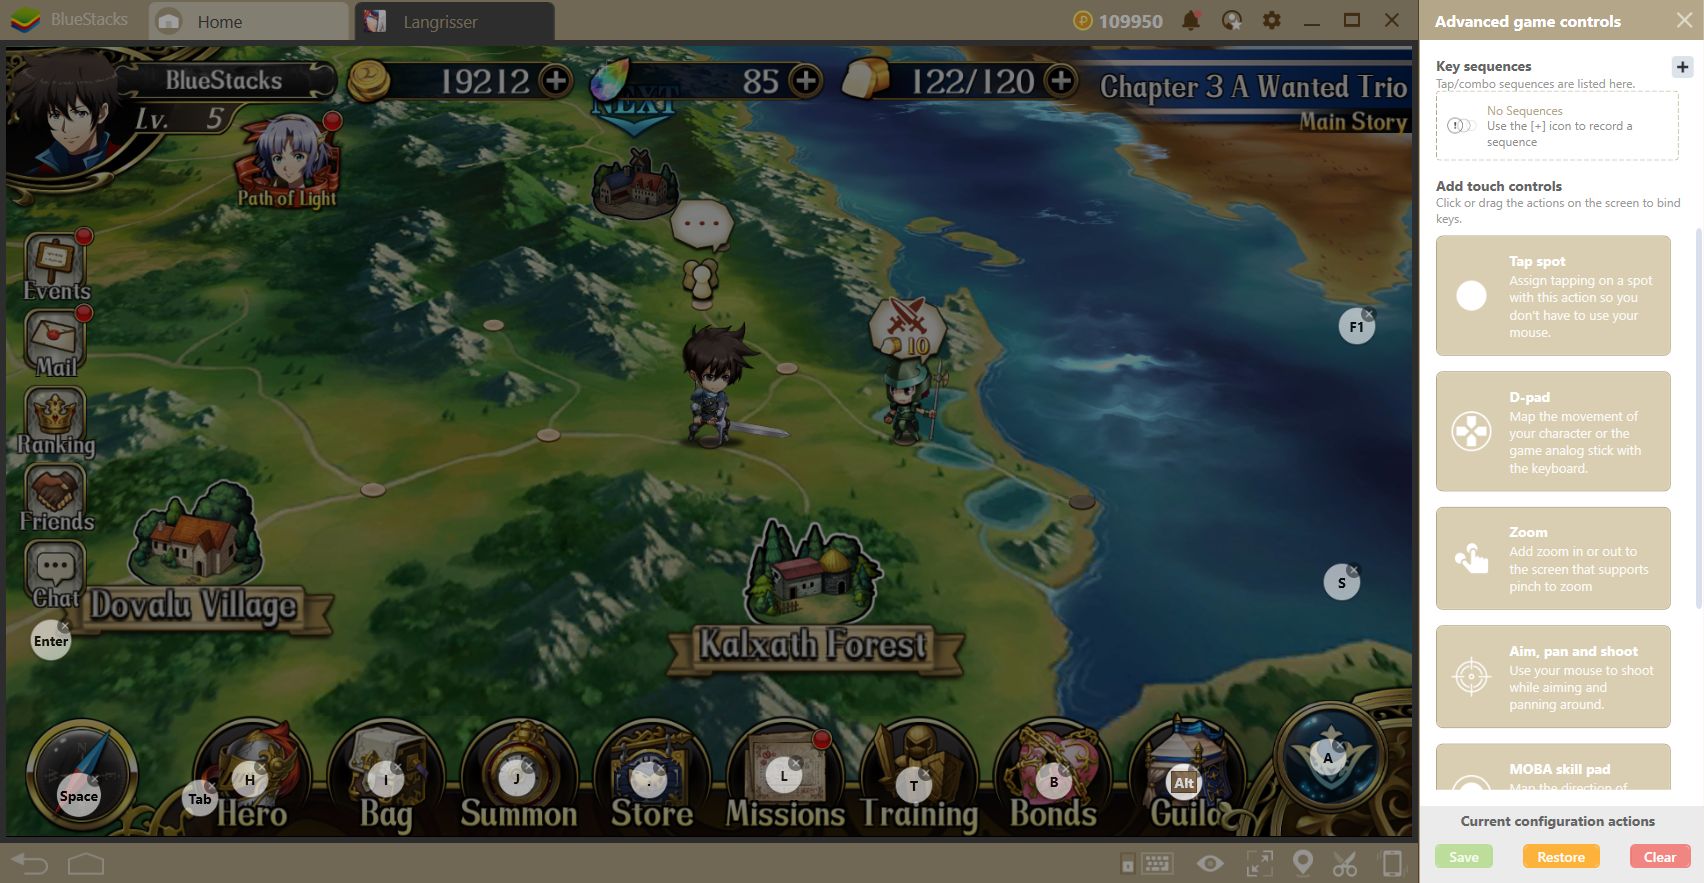 Langrisser on BlueStacks—Simple and Comfortable